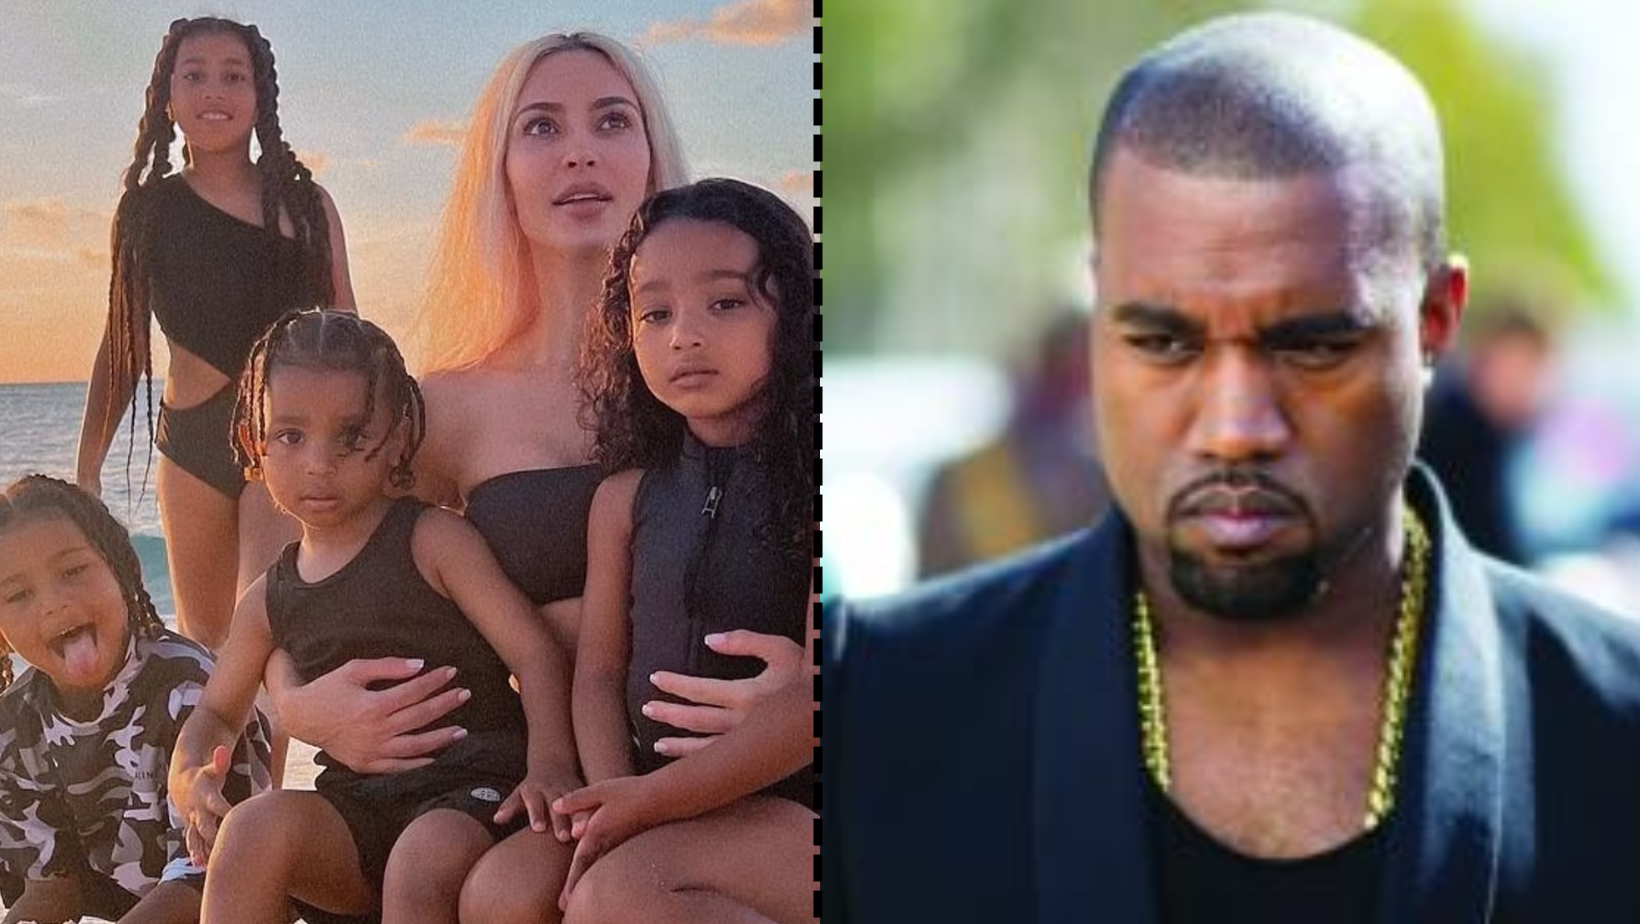 CAREFUL!  Kim Kardashian appears to be enjoying moments with kids while finding the “best way” to shut up Kanye West

+2023